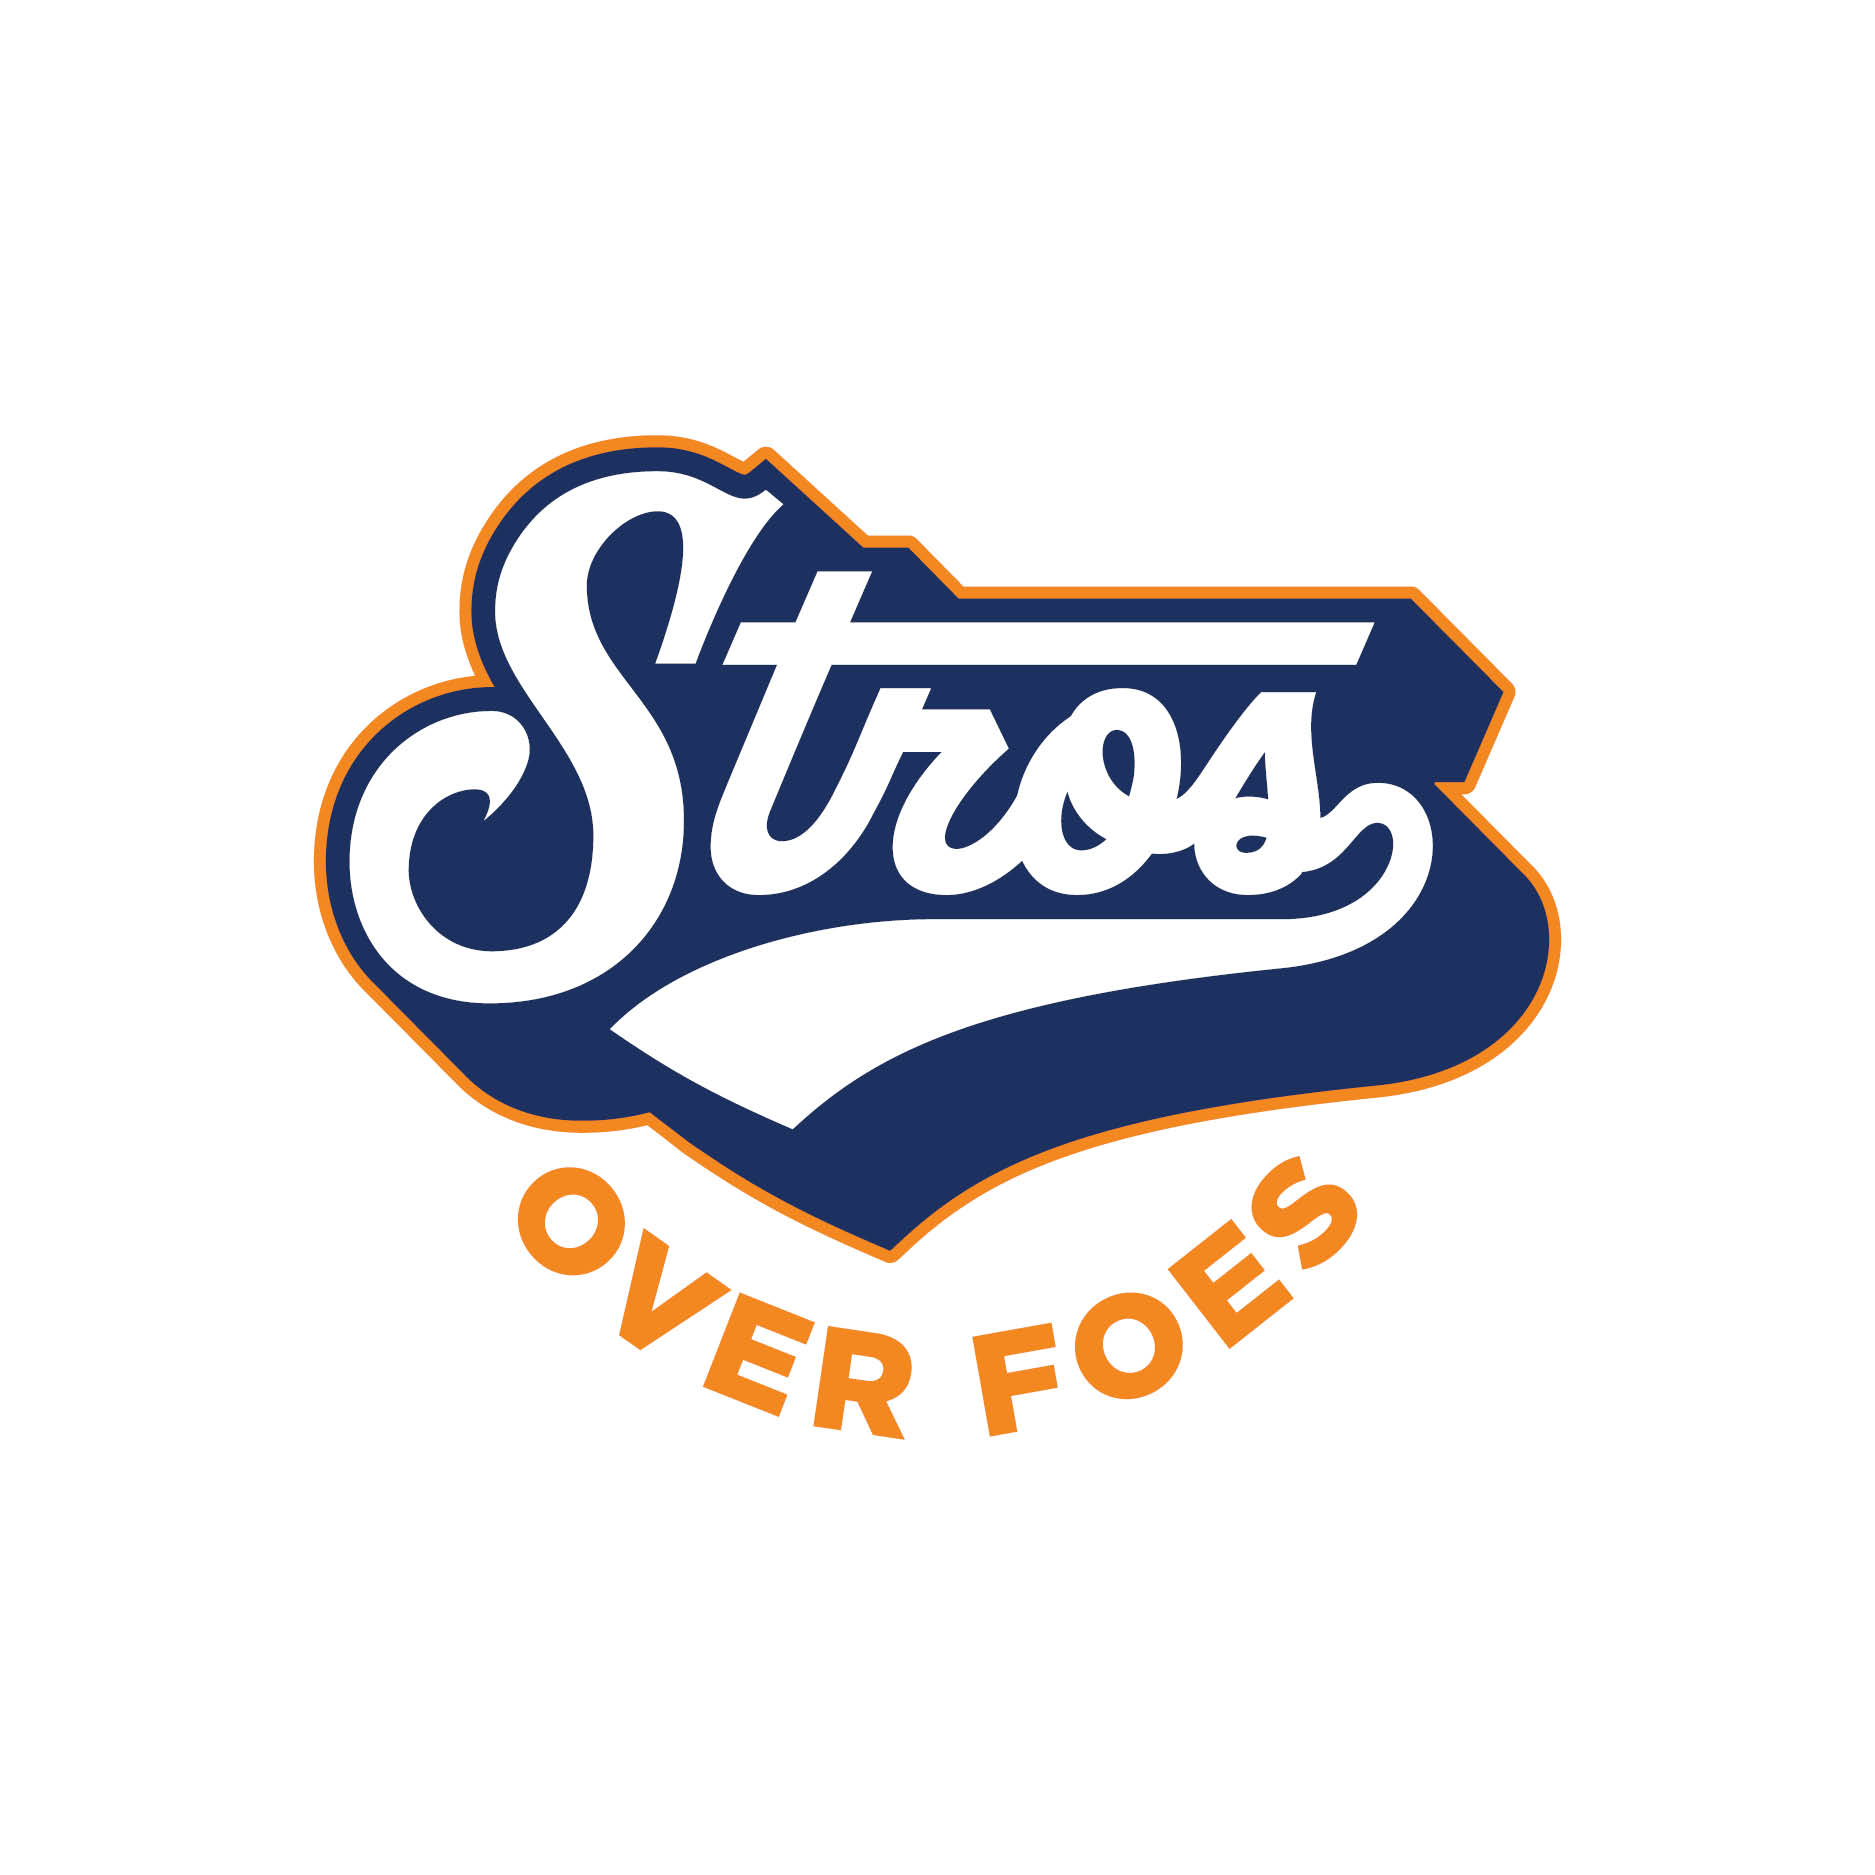 Stros over Foes logo design by logo designer Duffy Design Co for your inspiration and for the worlds largest logo competition